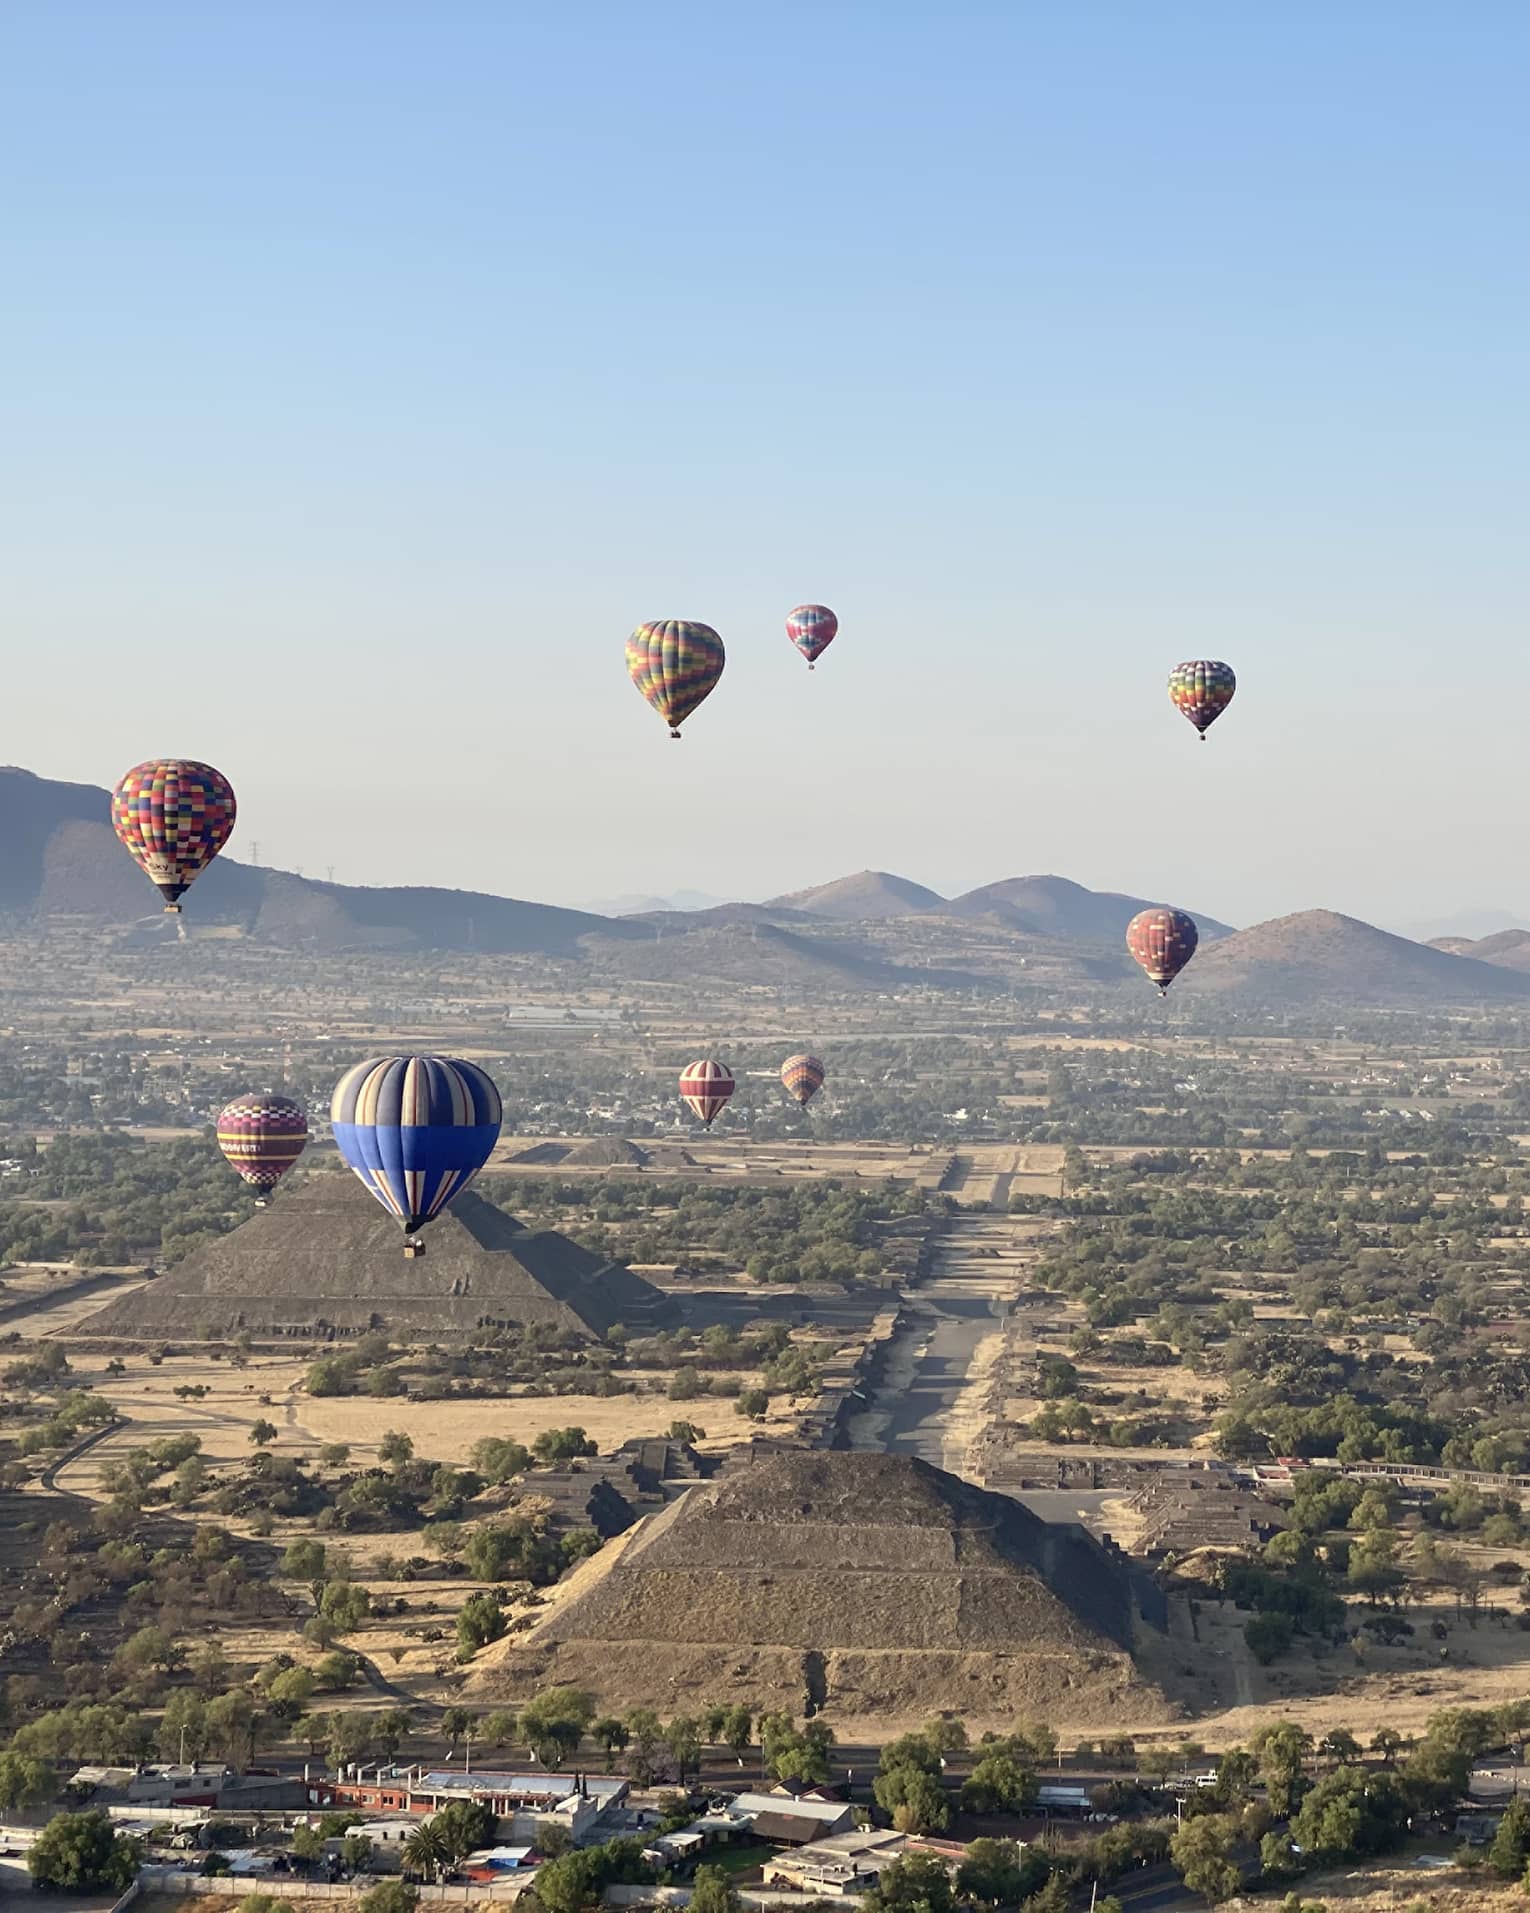 Hot-air balloons floating over old temples in a dessert covered in shrubs.